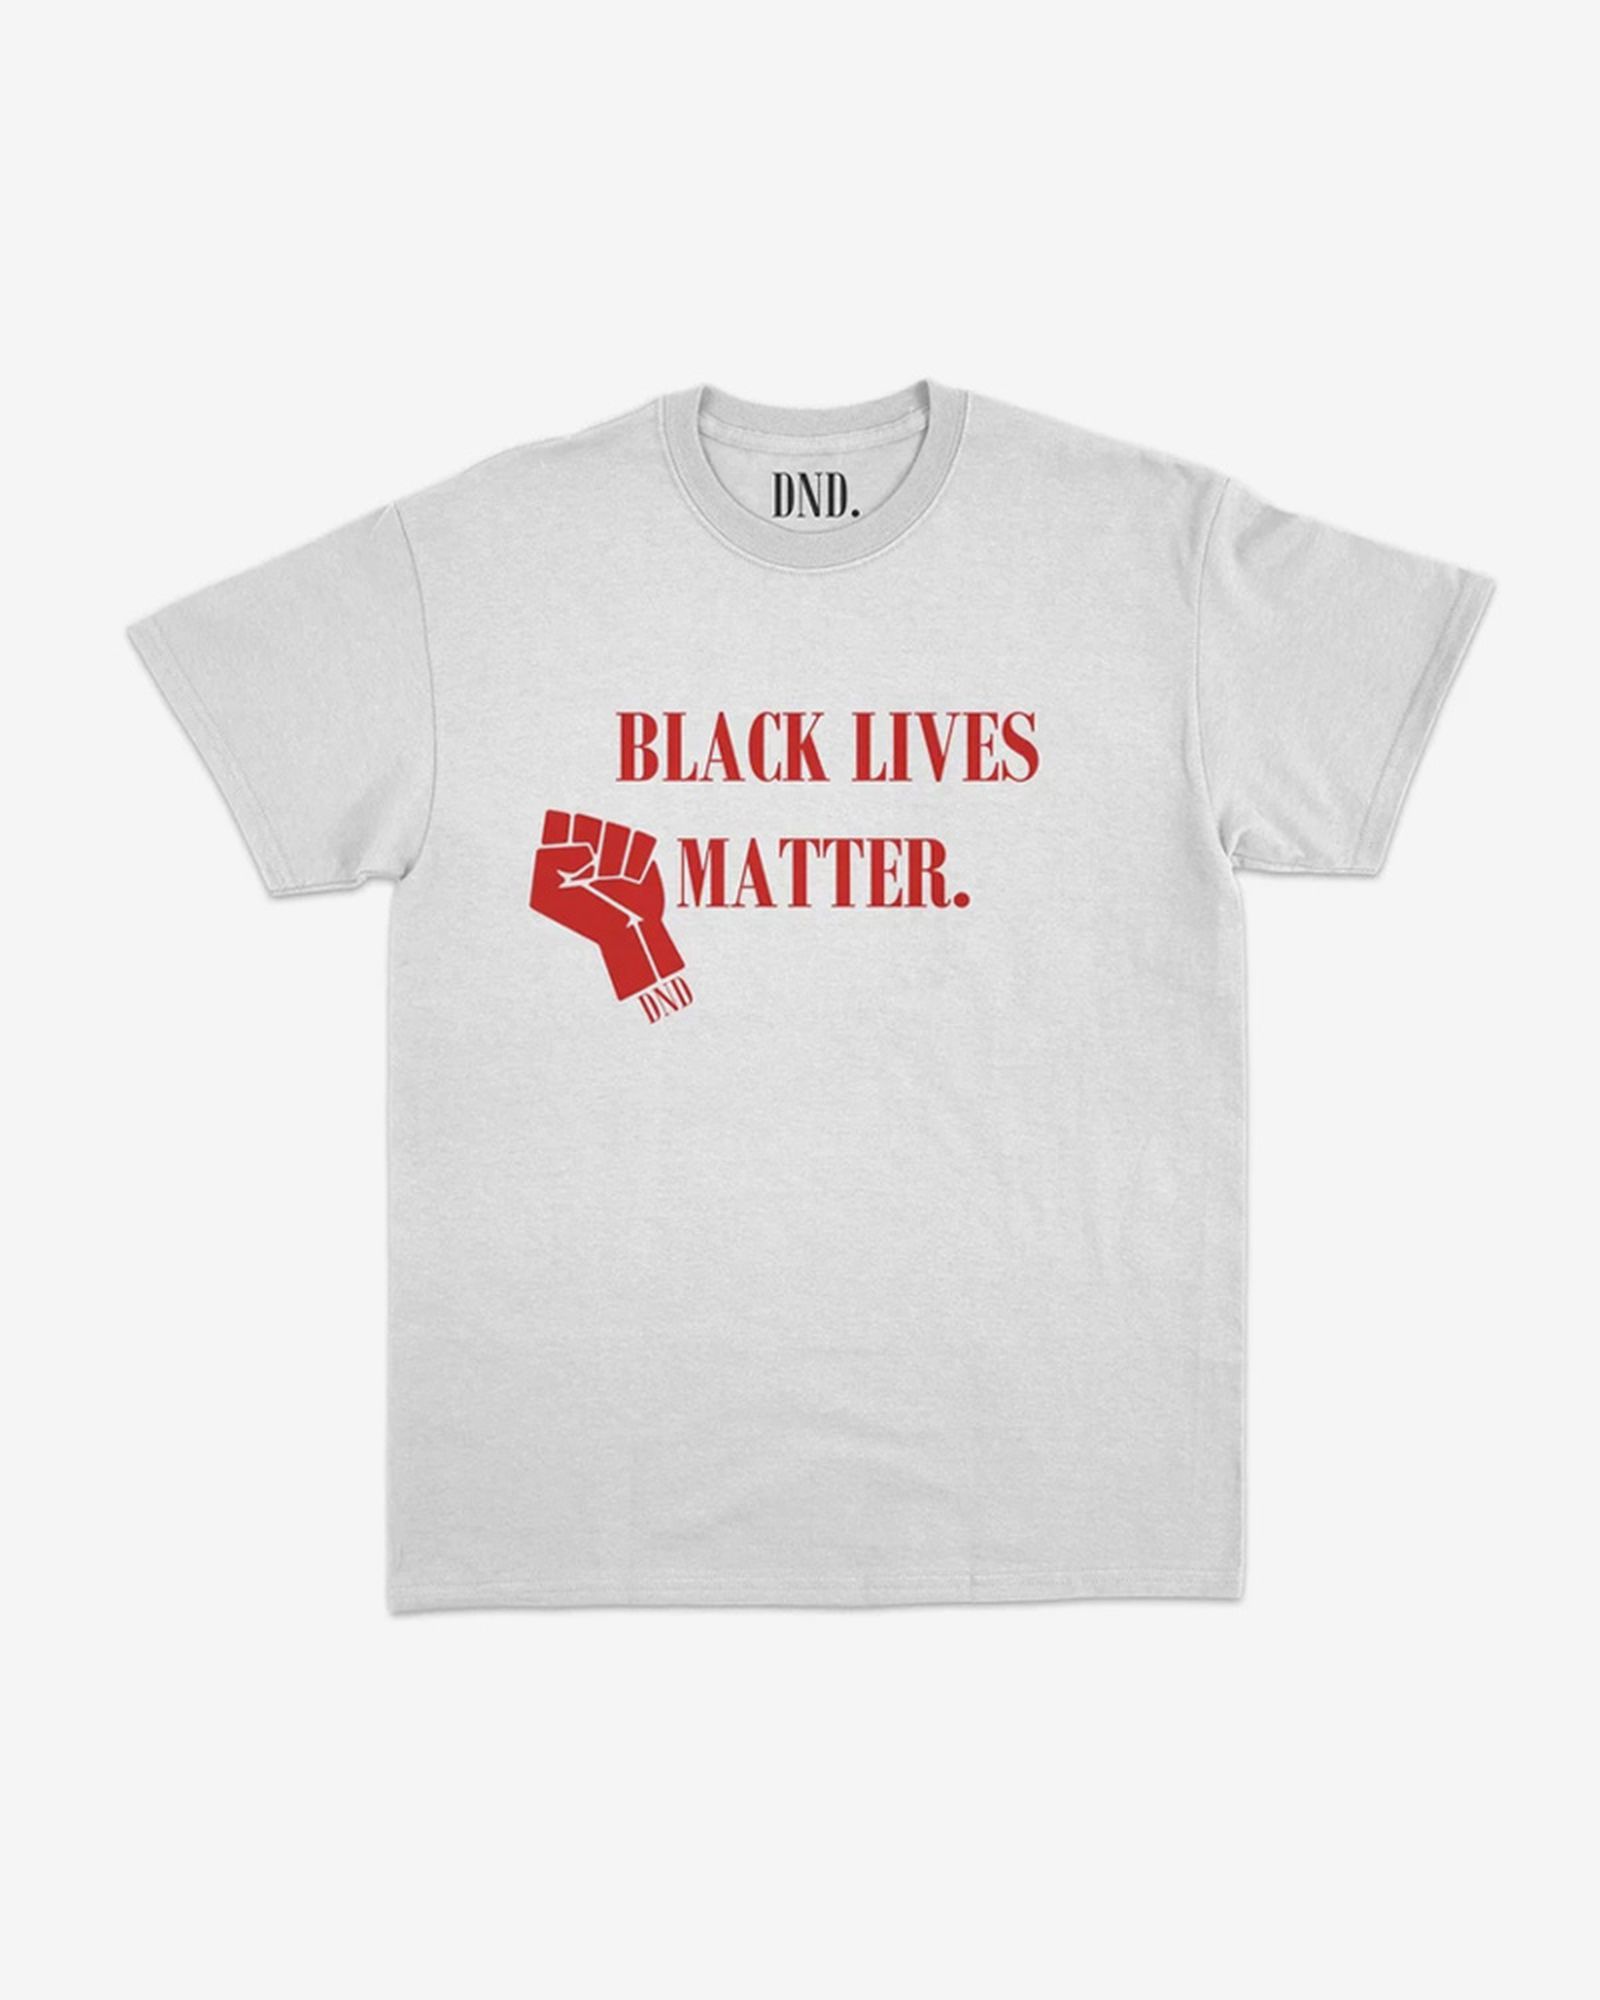 support-black-lives-matter-causes-with-these-charity-t-shirts-and-more-2-25